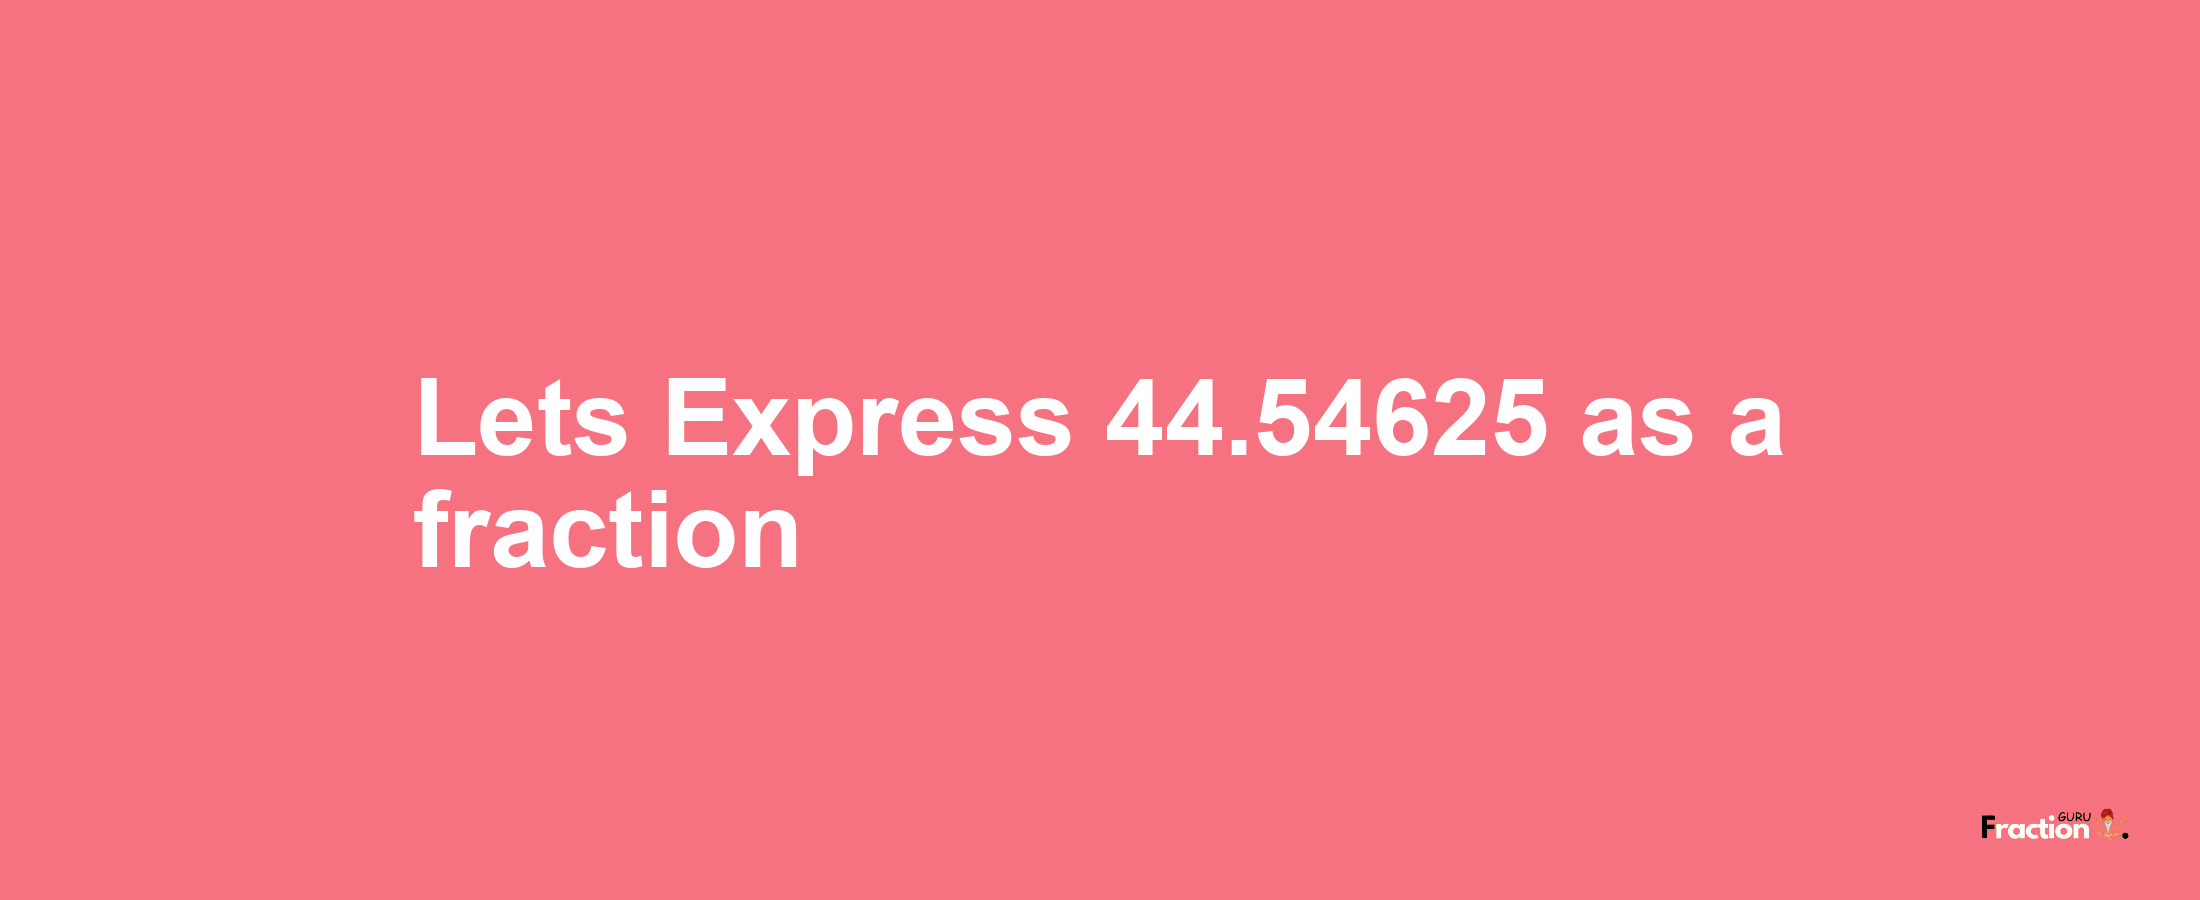 Lets Express 44.54625 as afraction